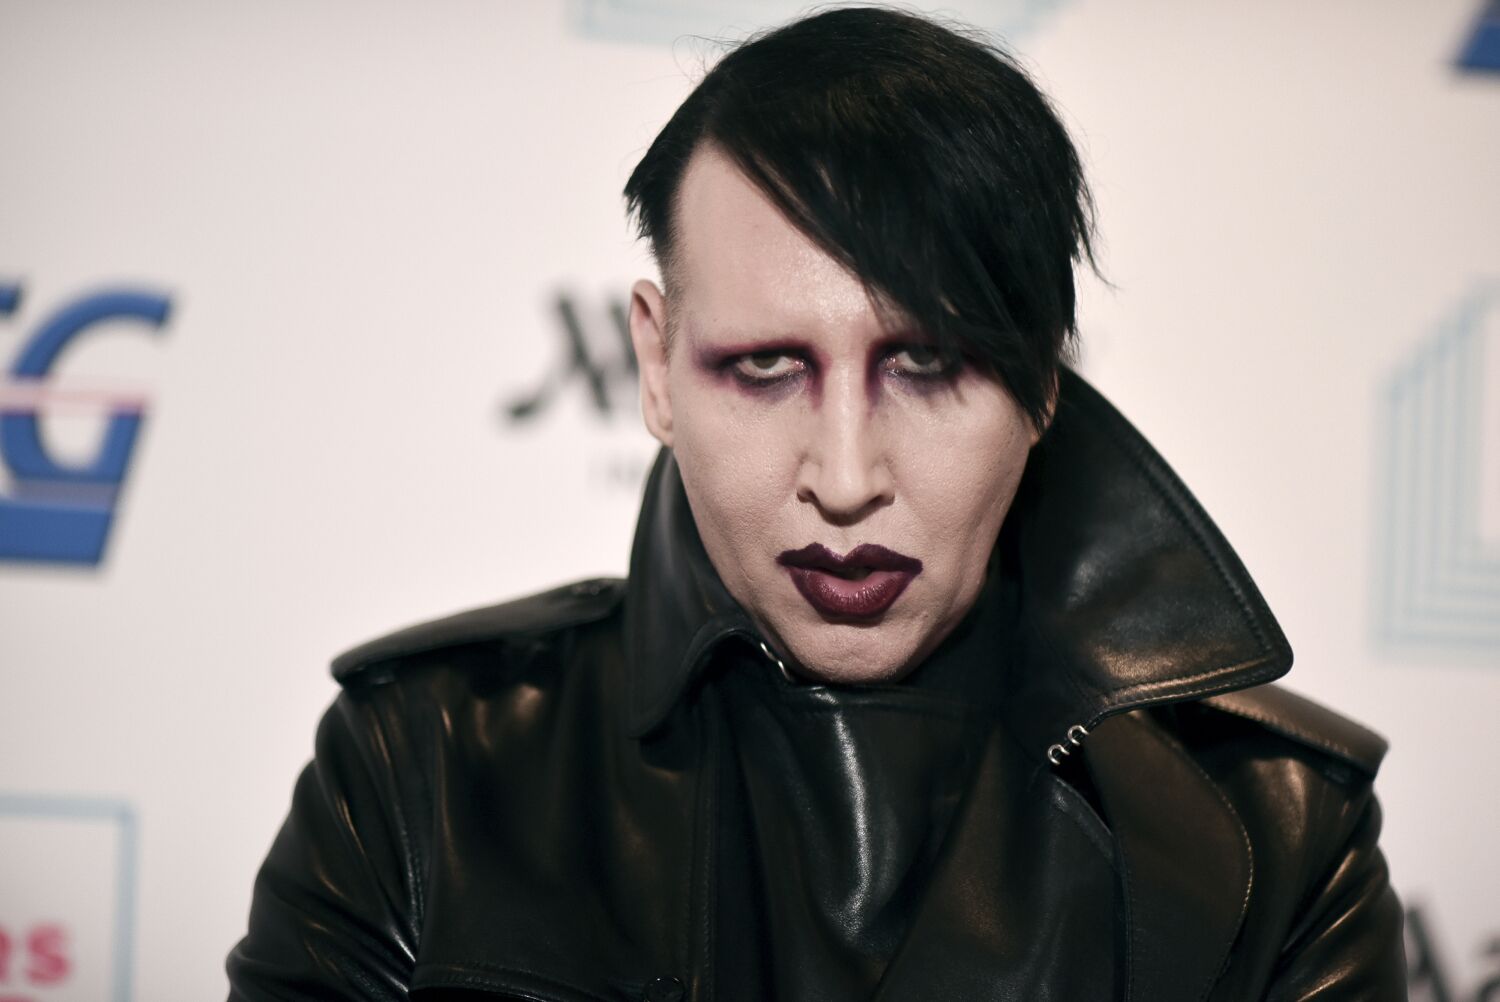 Marilyn Manson accused of sexual assault of minor in new lawsuit